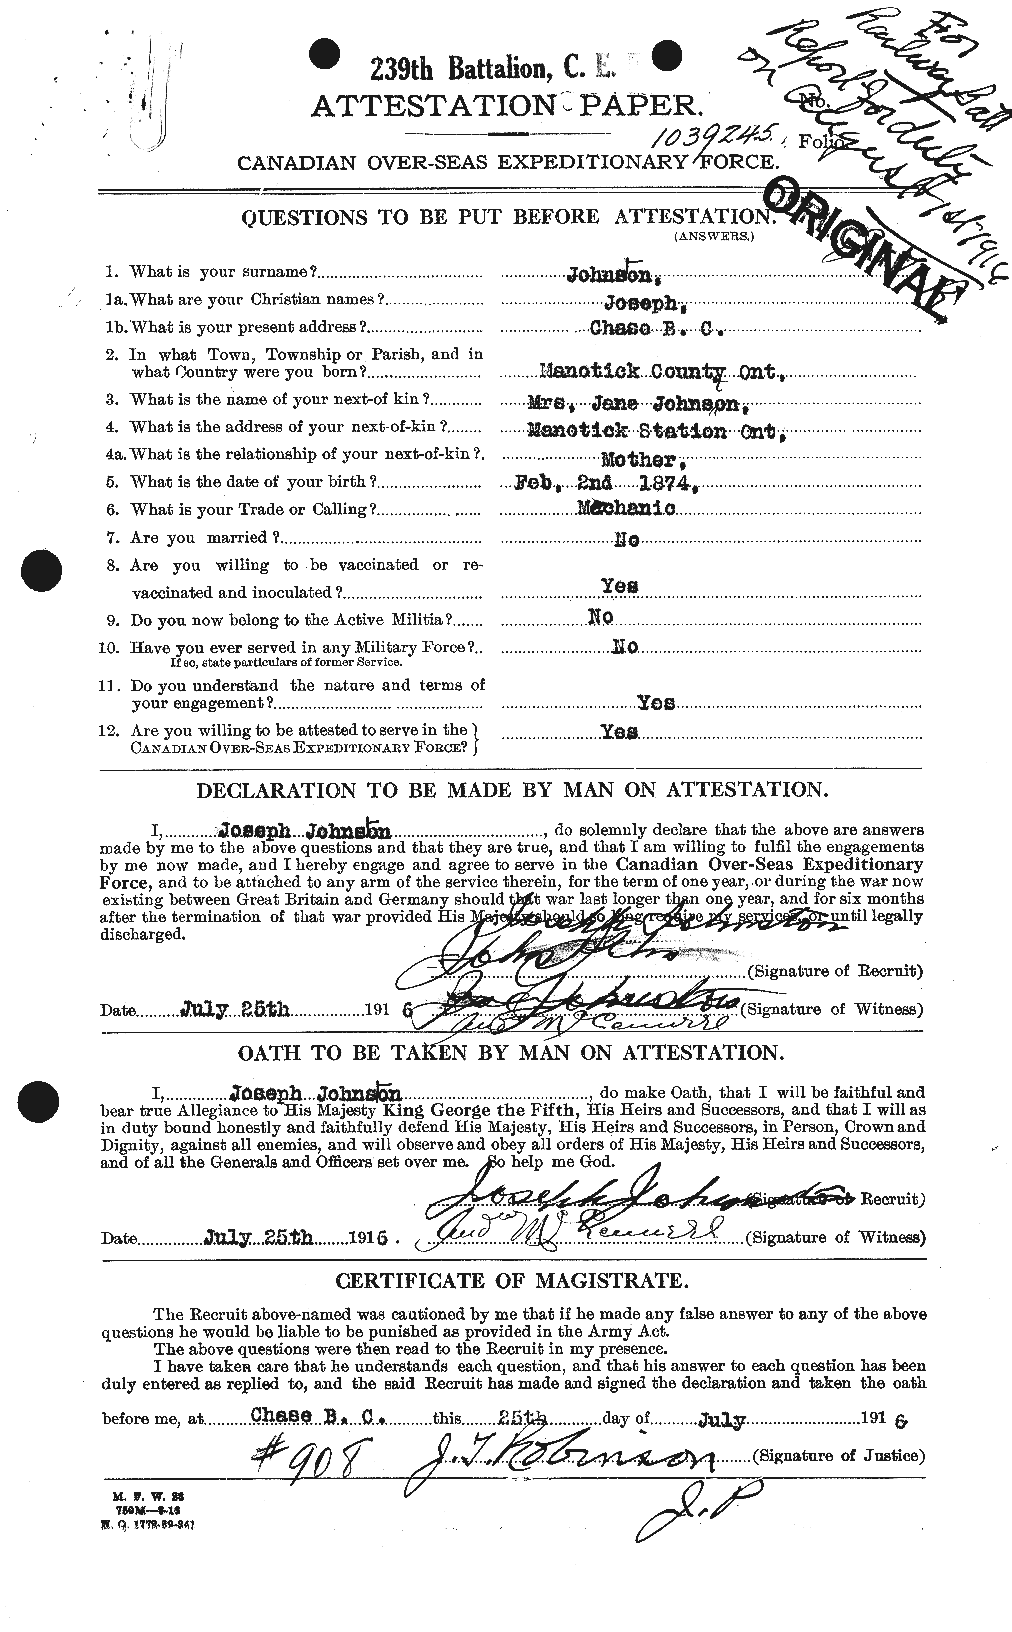 Personnel Records of the First World War - CEF 422891a